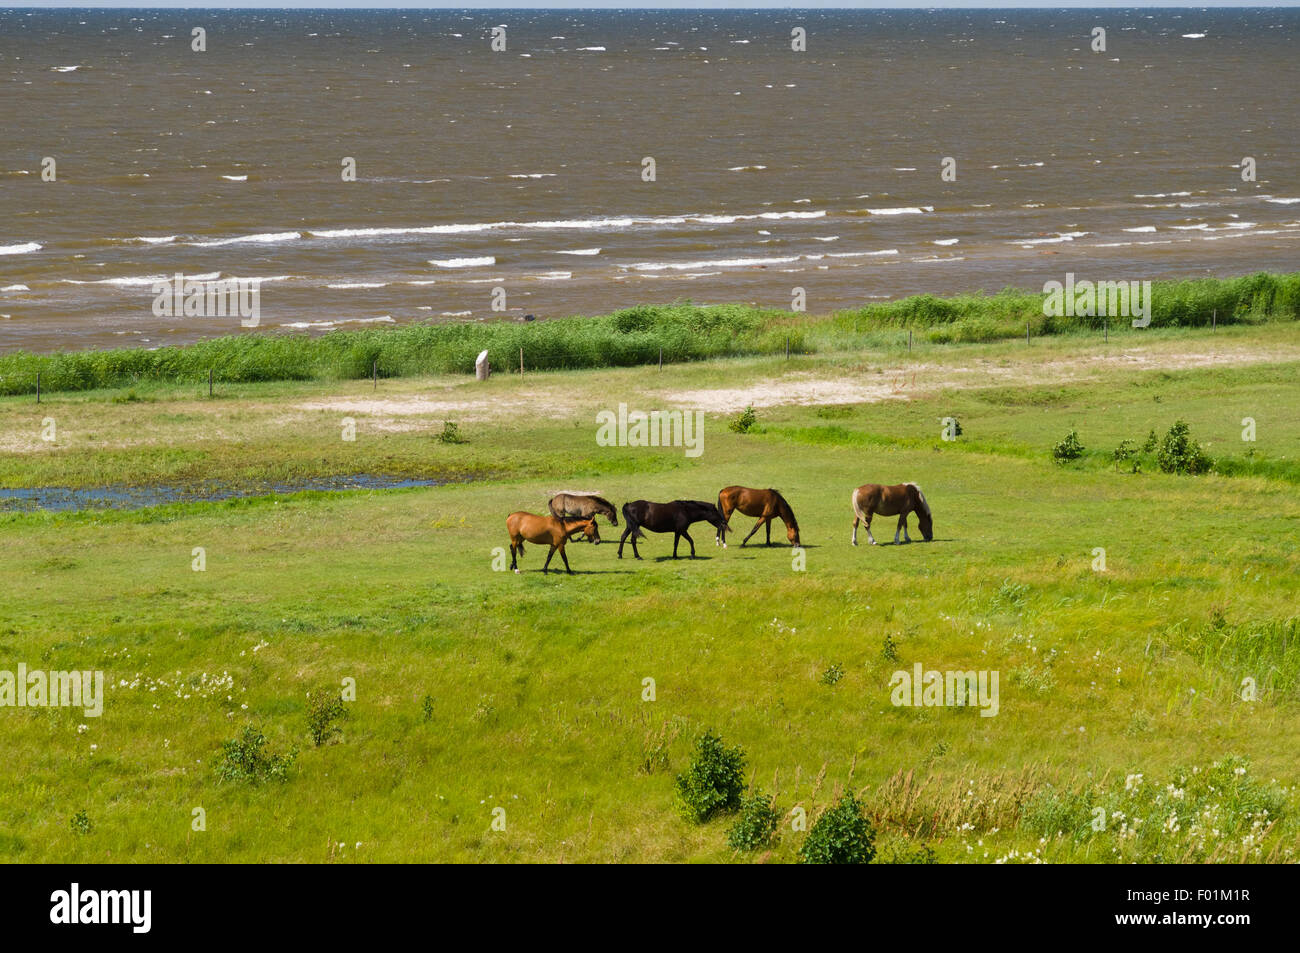 Five horses grazing on the green lush meadow near the sea, overlook view Stock Photo